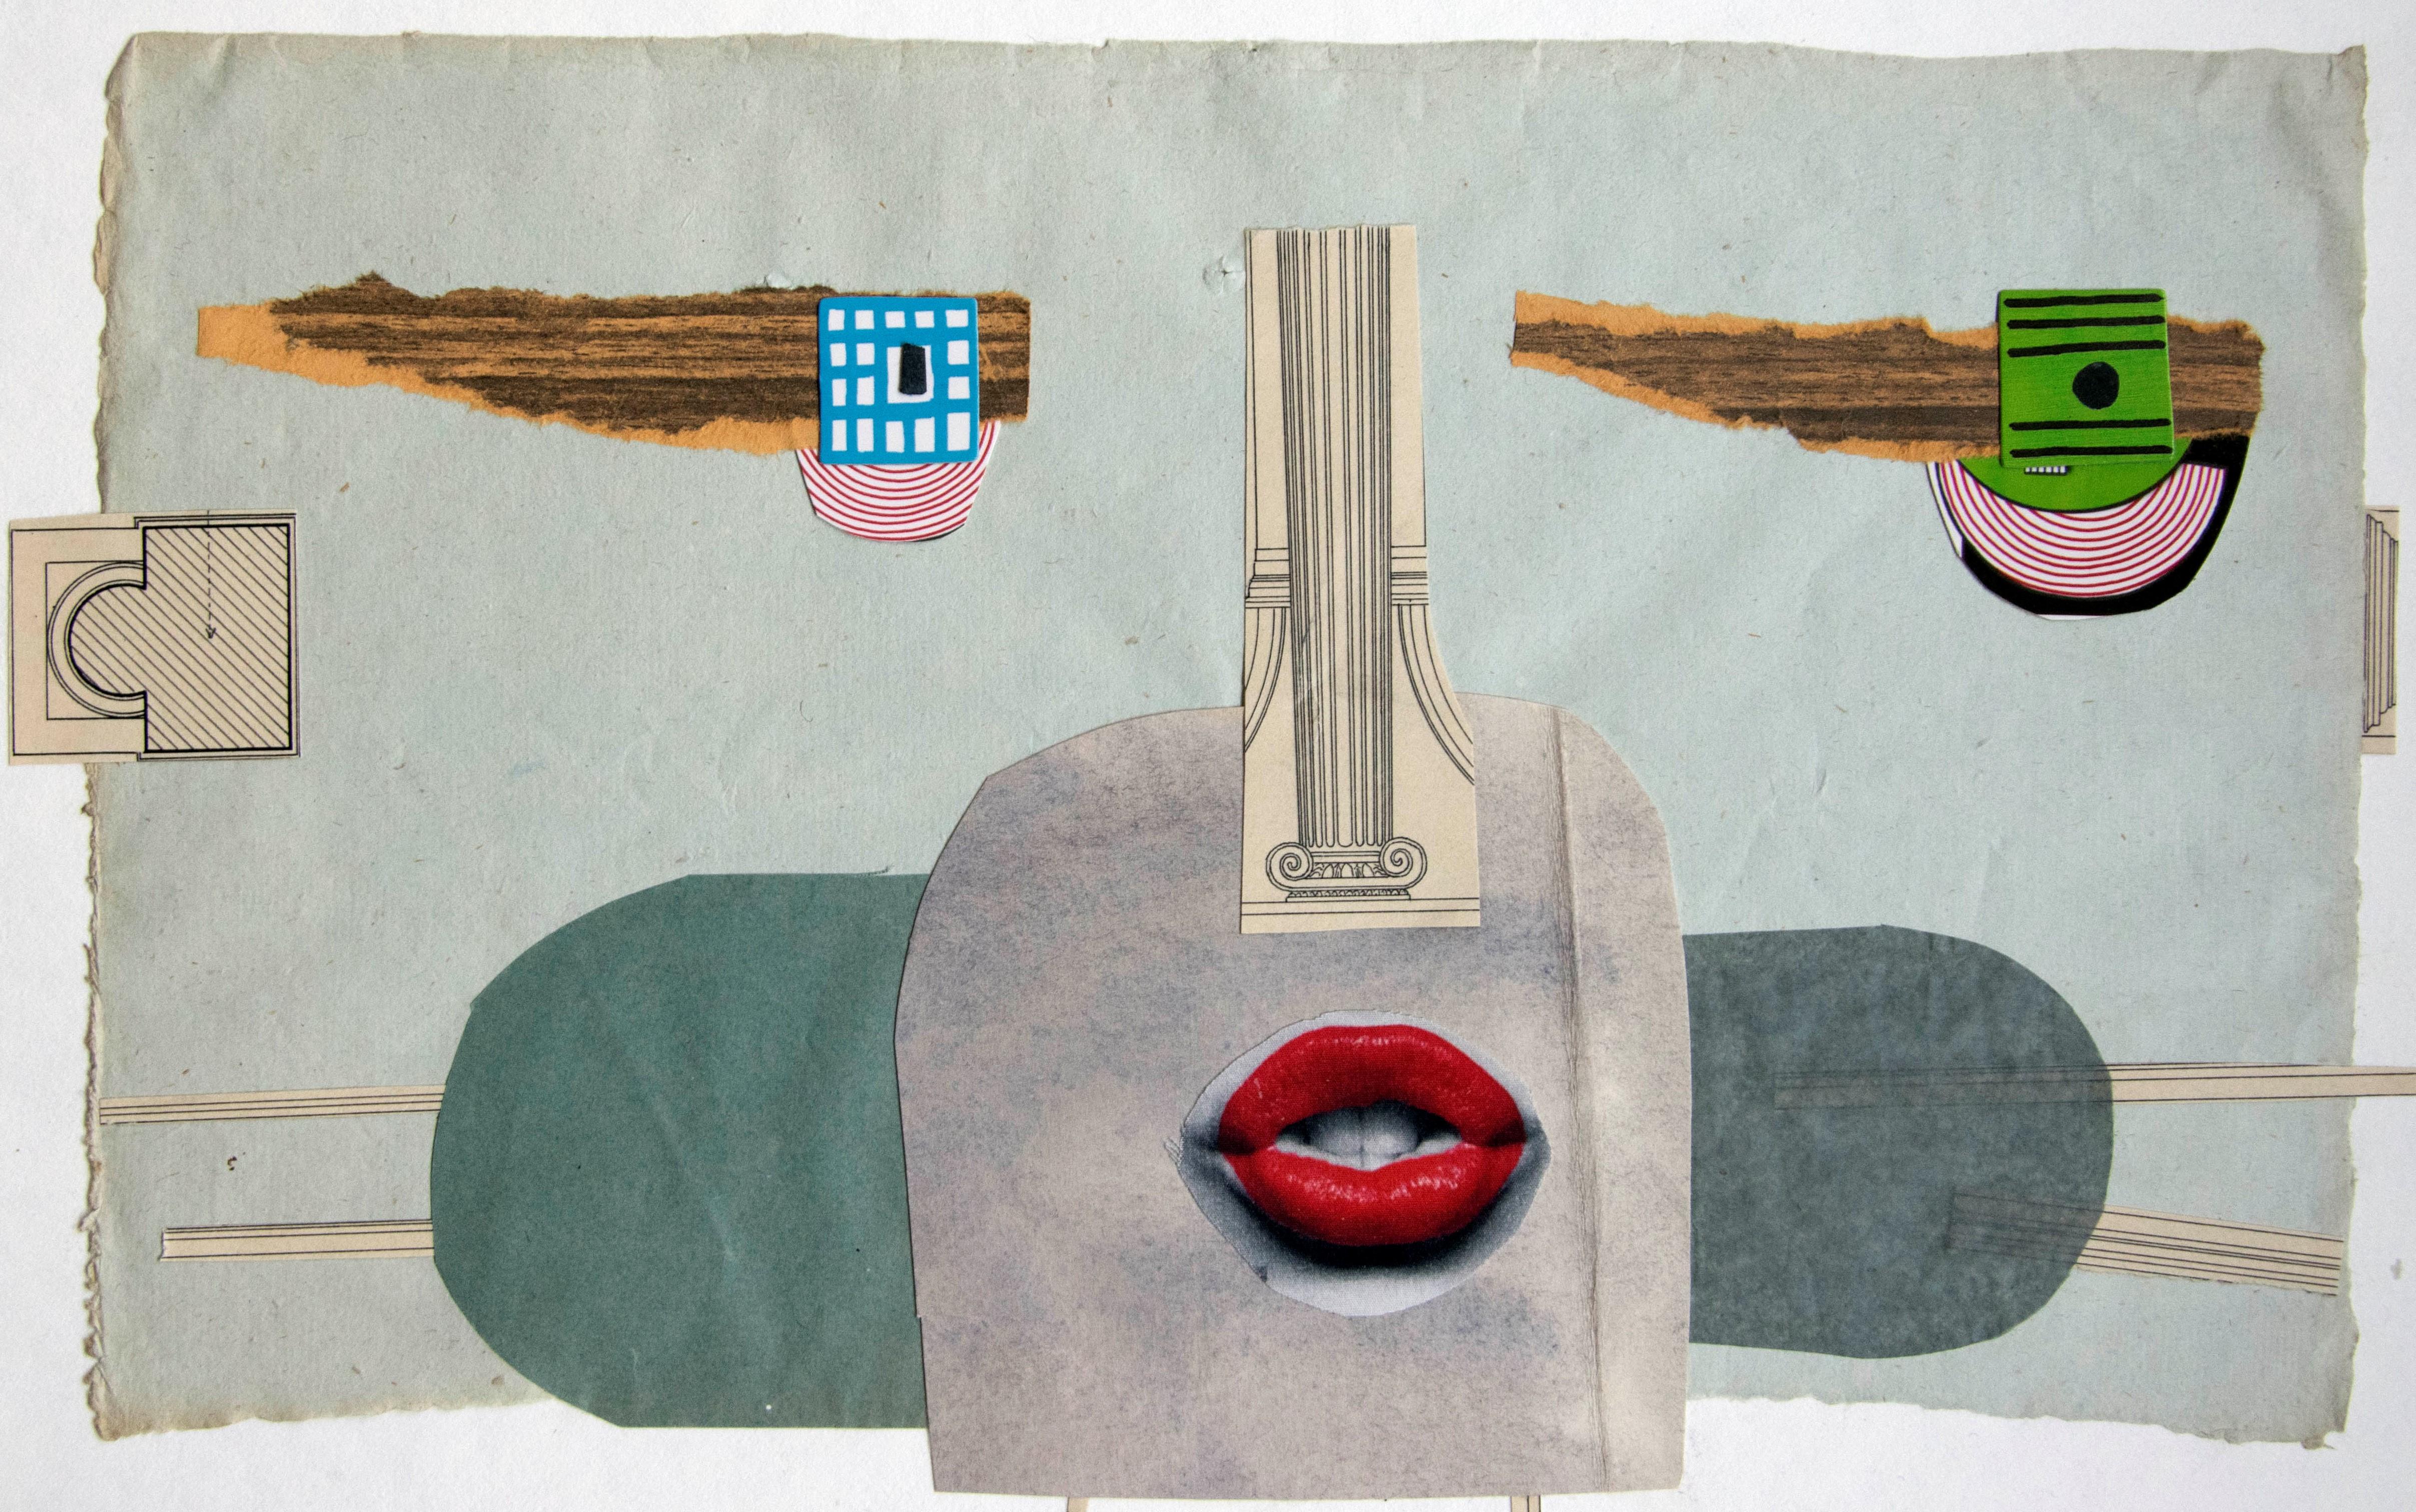 The Accounting Women, 2019
collage on paper
11 13/16 H x 15 3/4 w in
30 H x 40 W cm

The artist’s collages describe a series of faces composed of different materials – cardboards, textiles, fur and paper. In this series, figure deconstruction is a